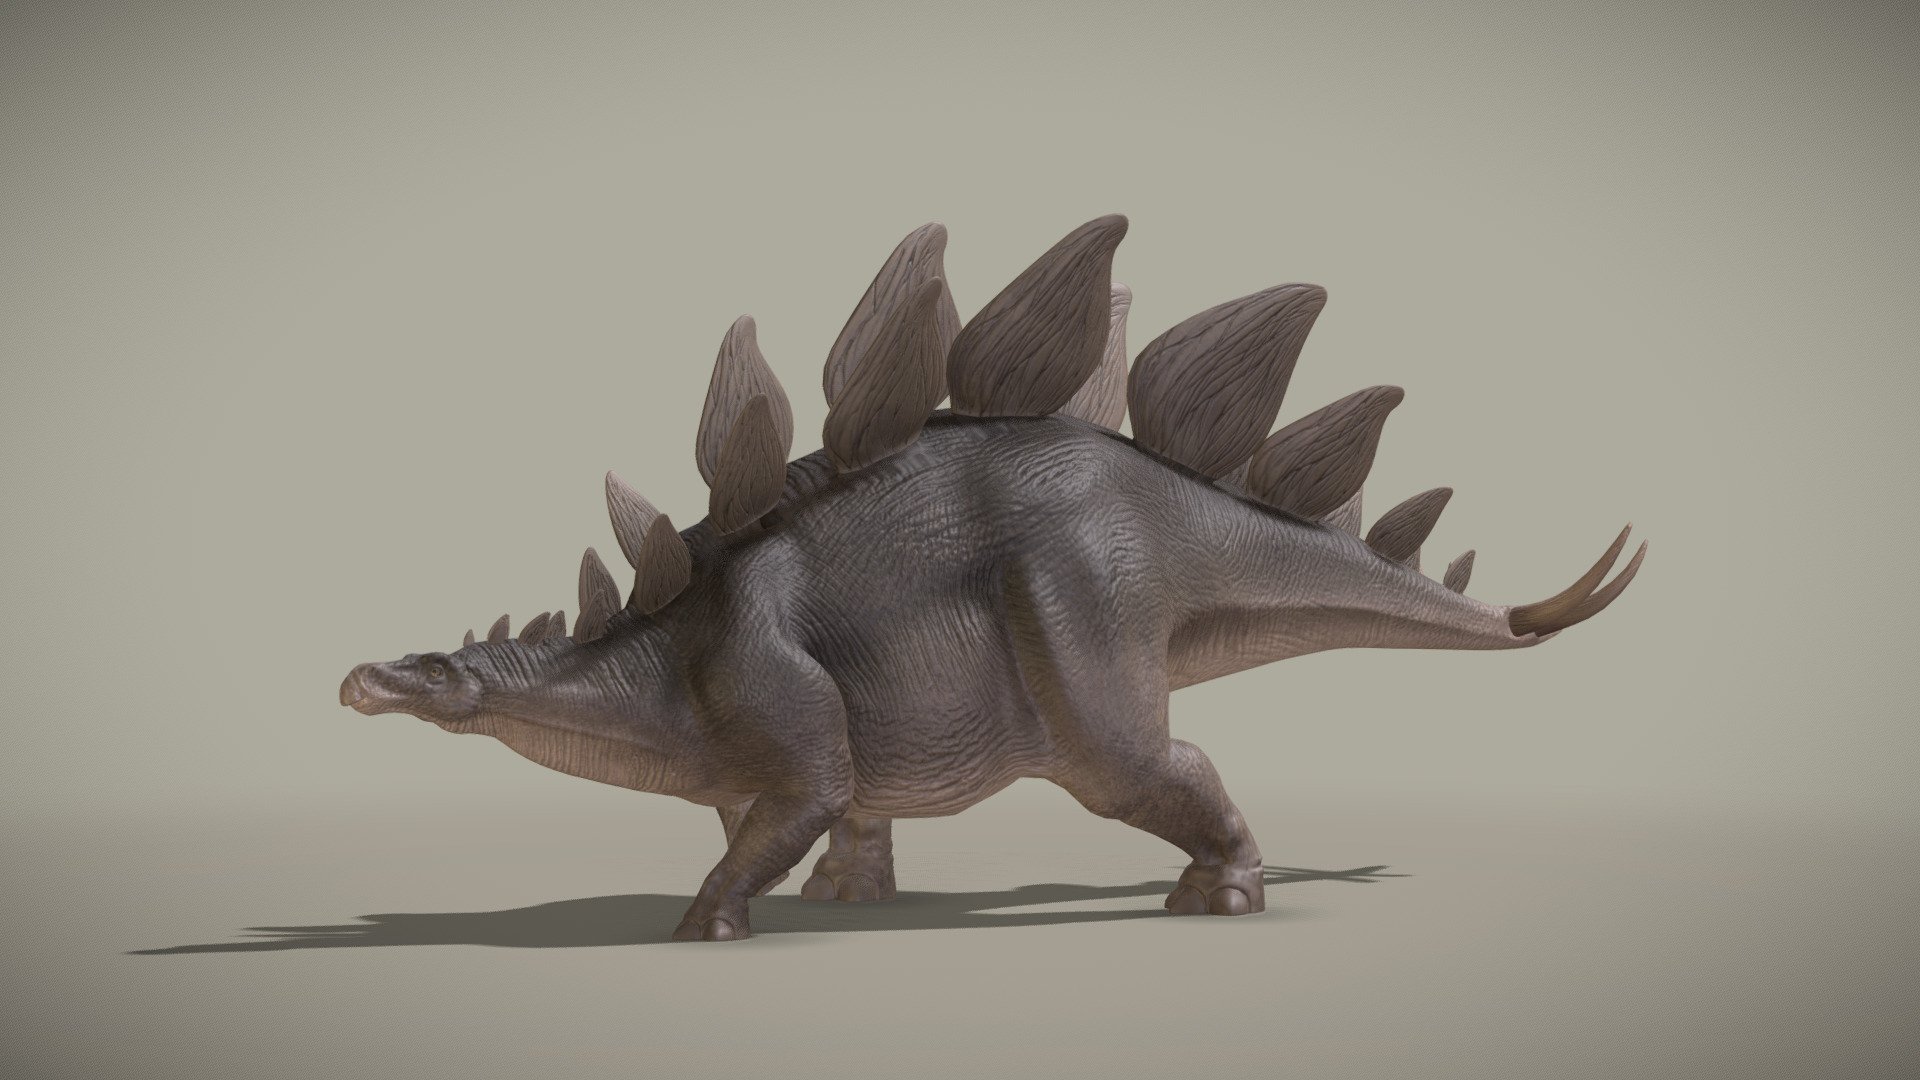 Made with Blender.

This model is featured in the official Sketchfab VR app:
 - Stegosaurus Stenops - Buy Royalty Free 3D model by Kyan0s 3d model